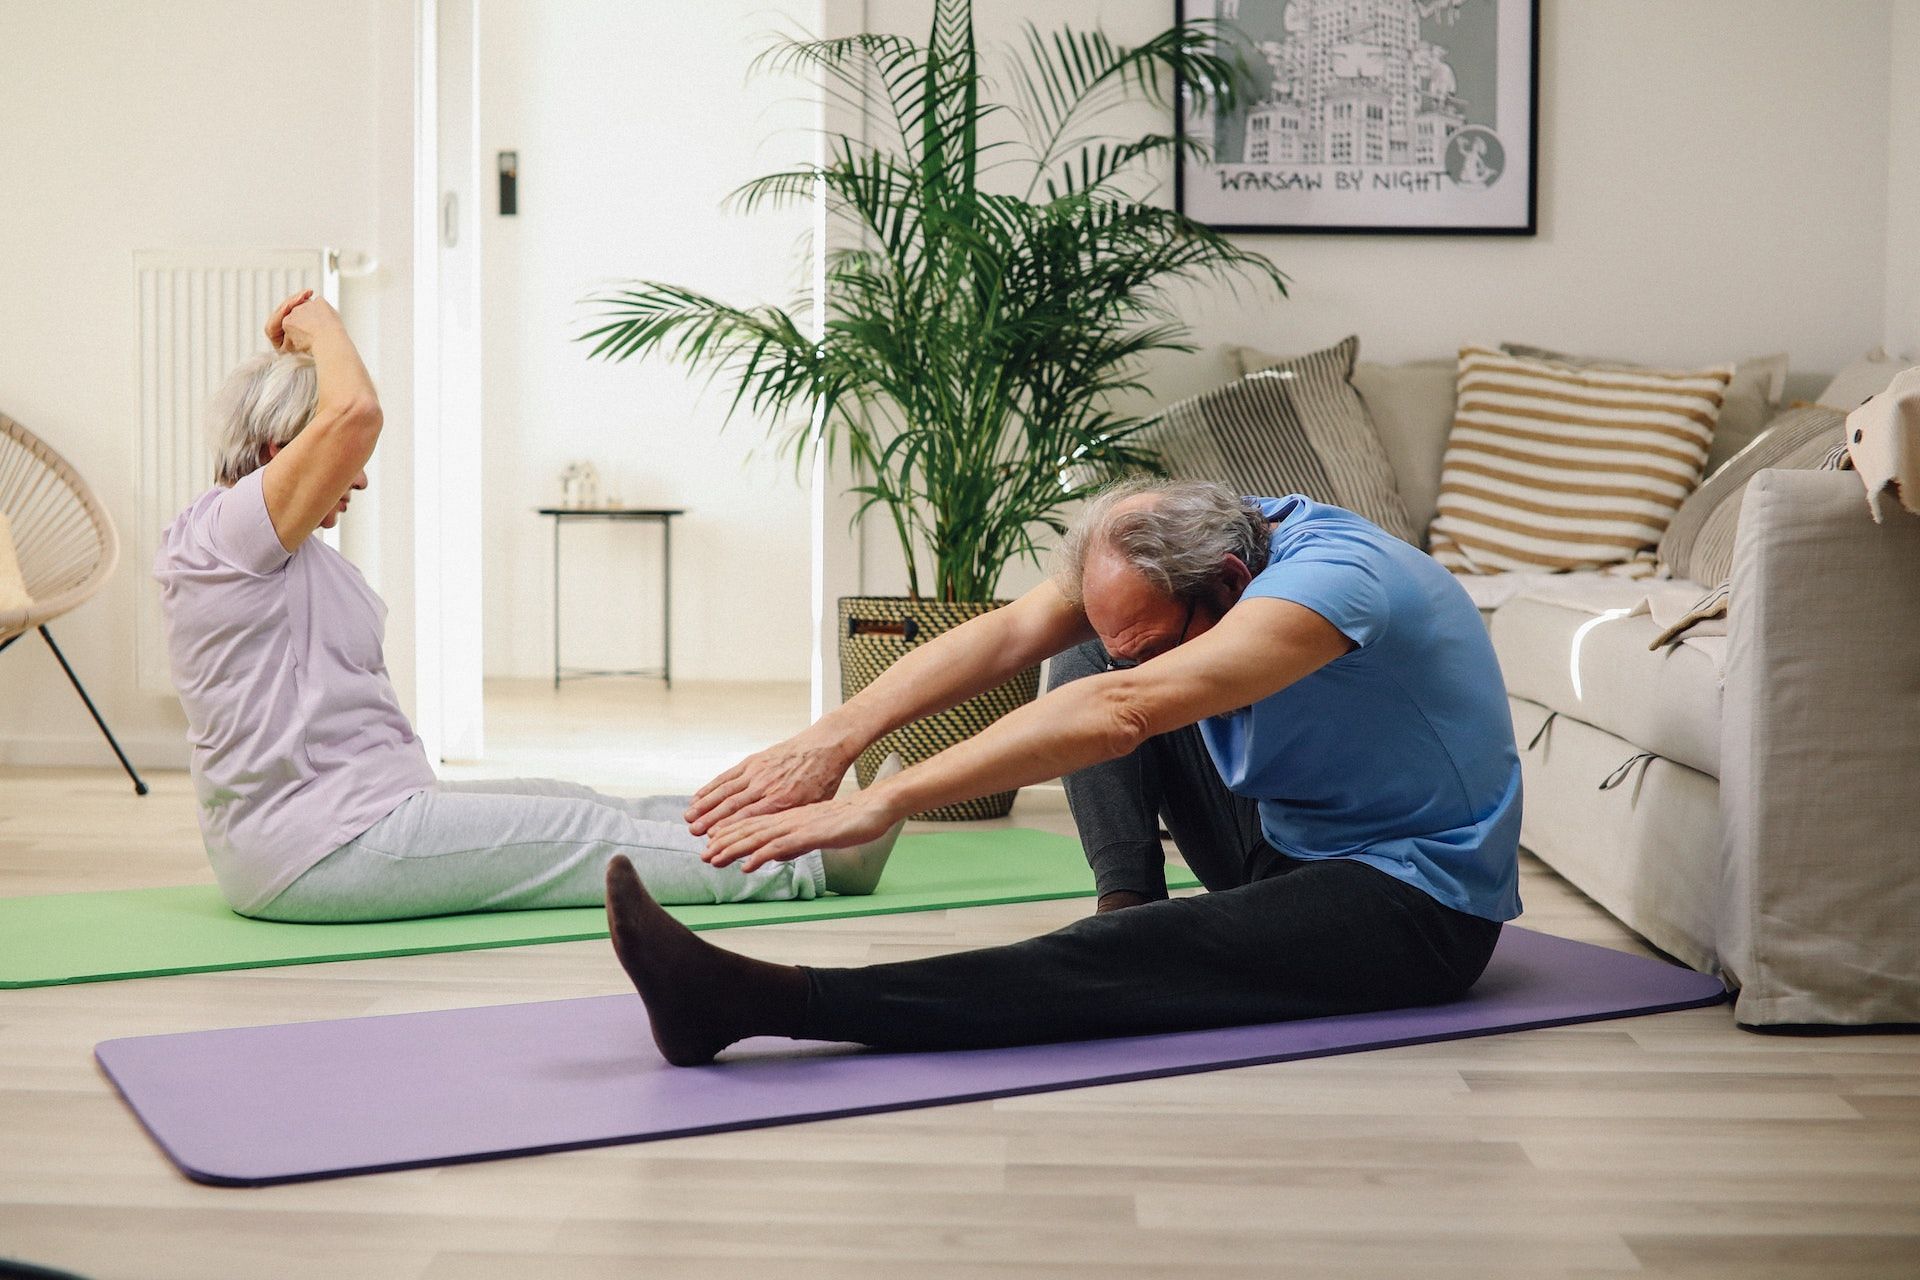 Balance exercises are important for older adults. (Photo via Pexels/T Leish)